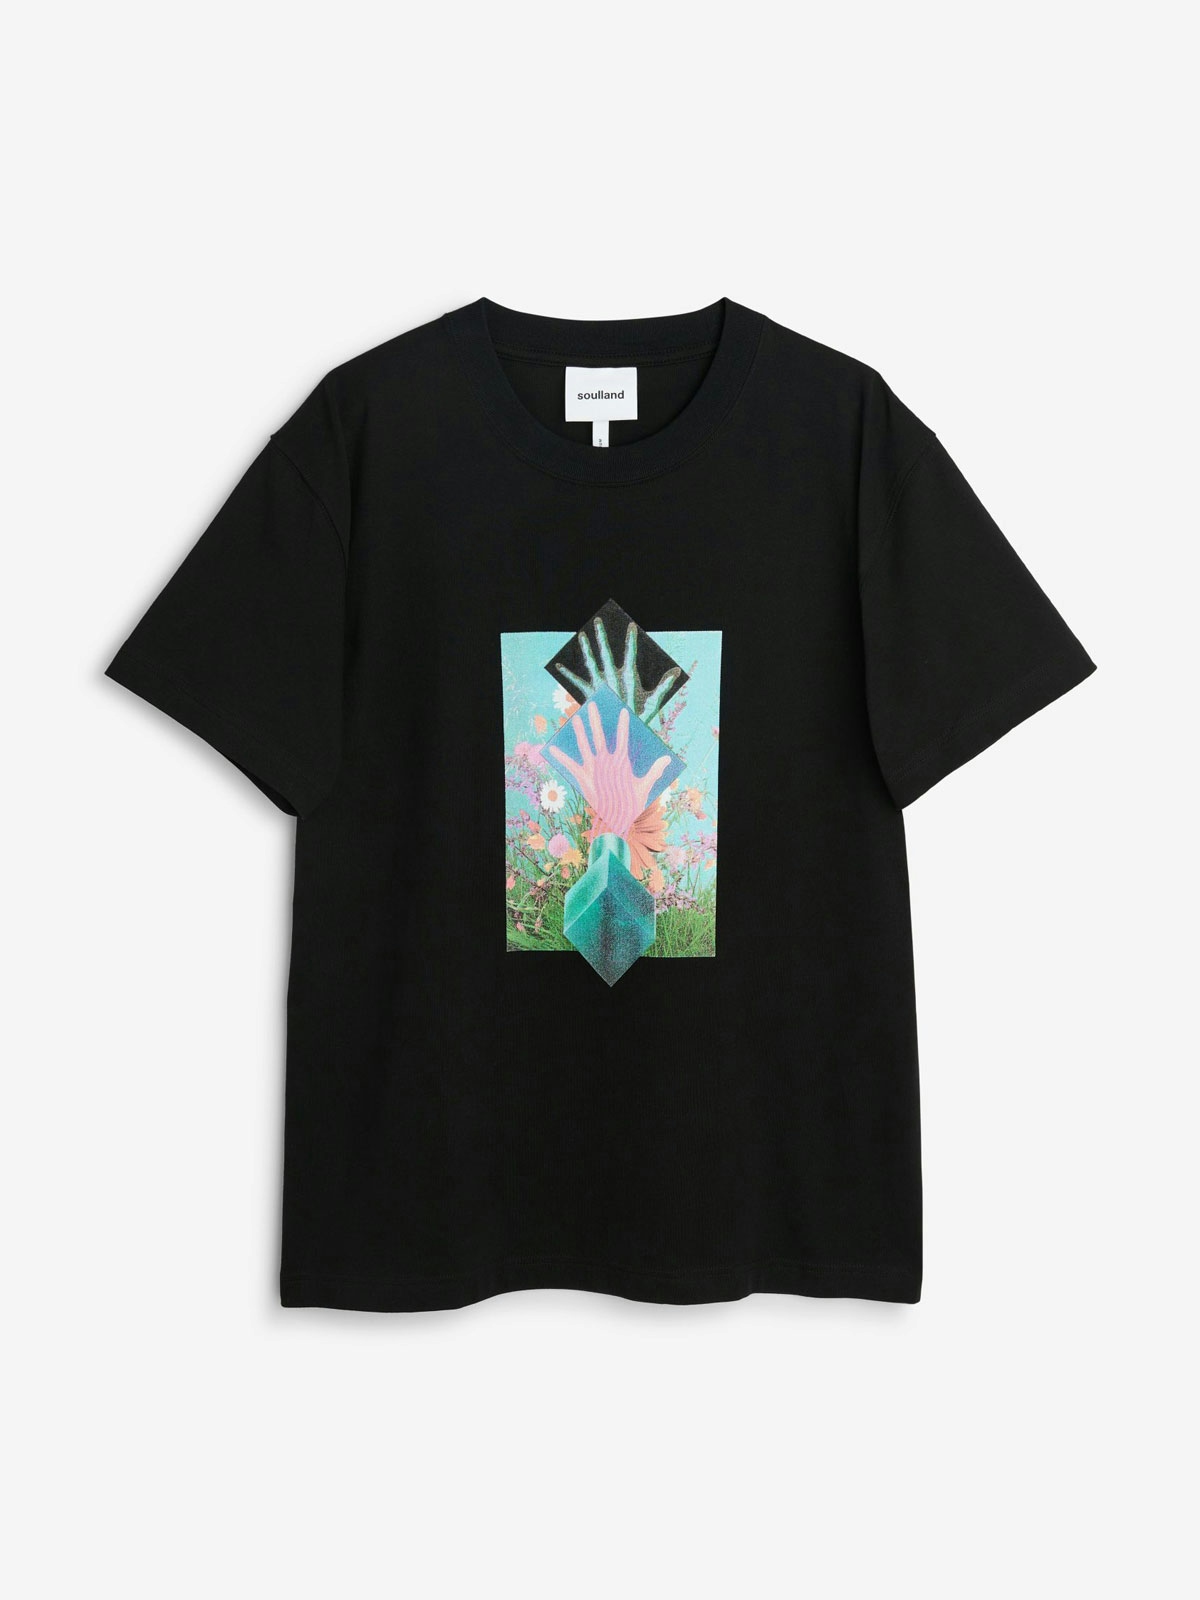 Poetic Collective Soulland x Poetic Collective T-shirt Black 1